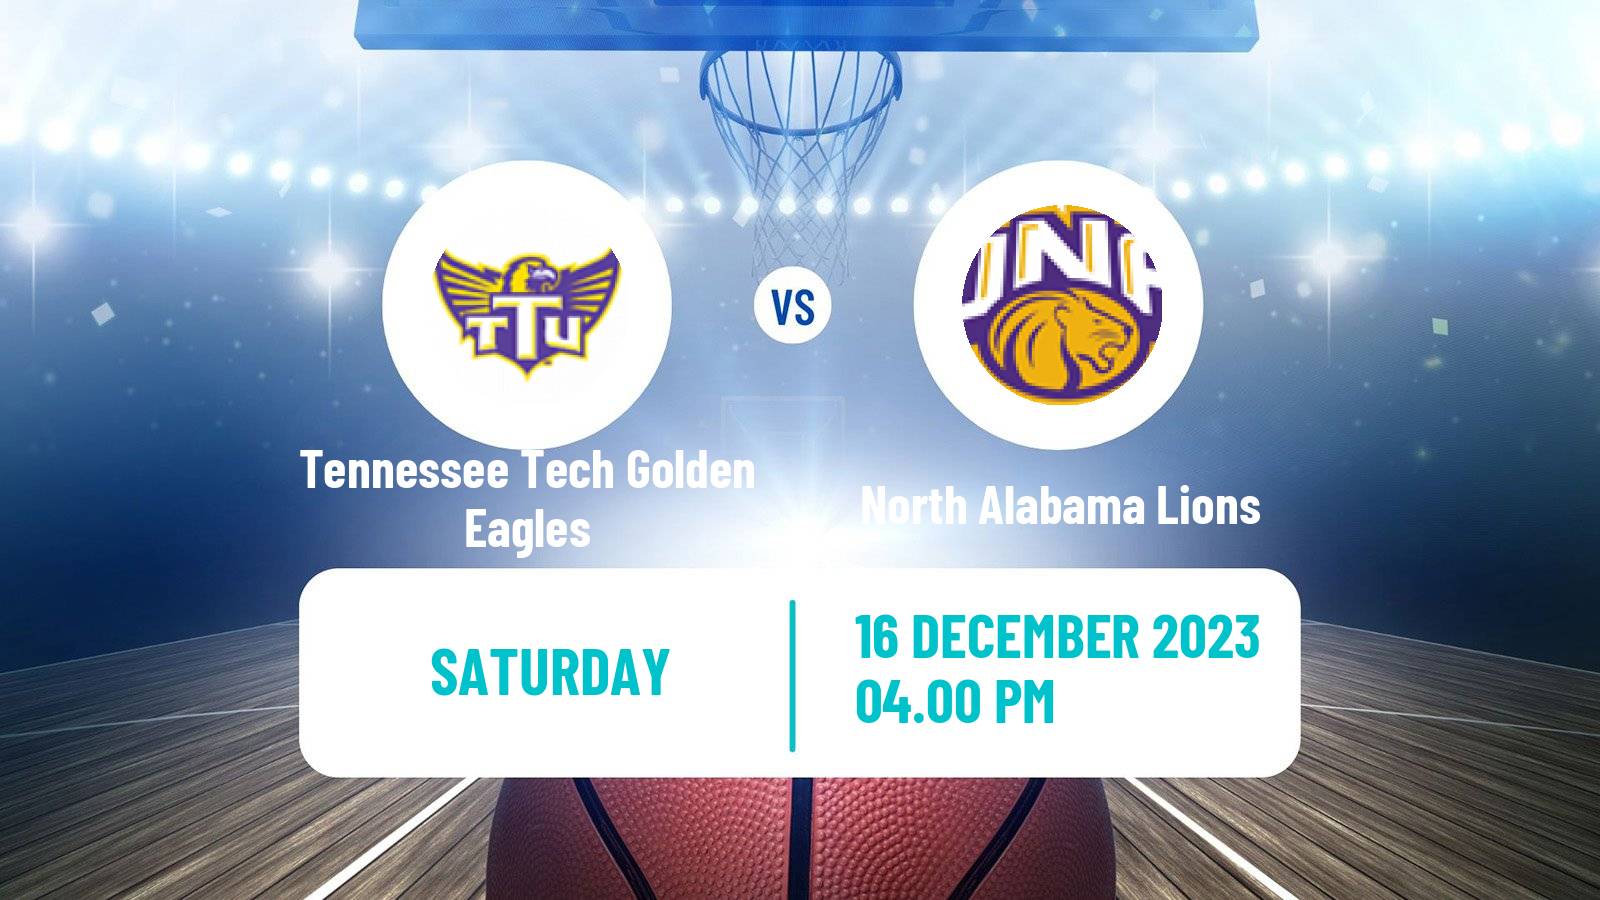 Basketball NCAA College Basketball Tennessee Tech Golden Eagles - North Alabama Lions